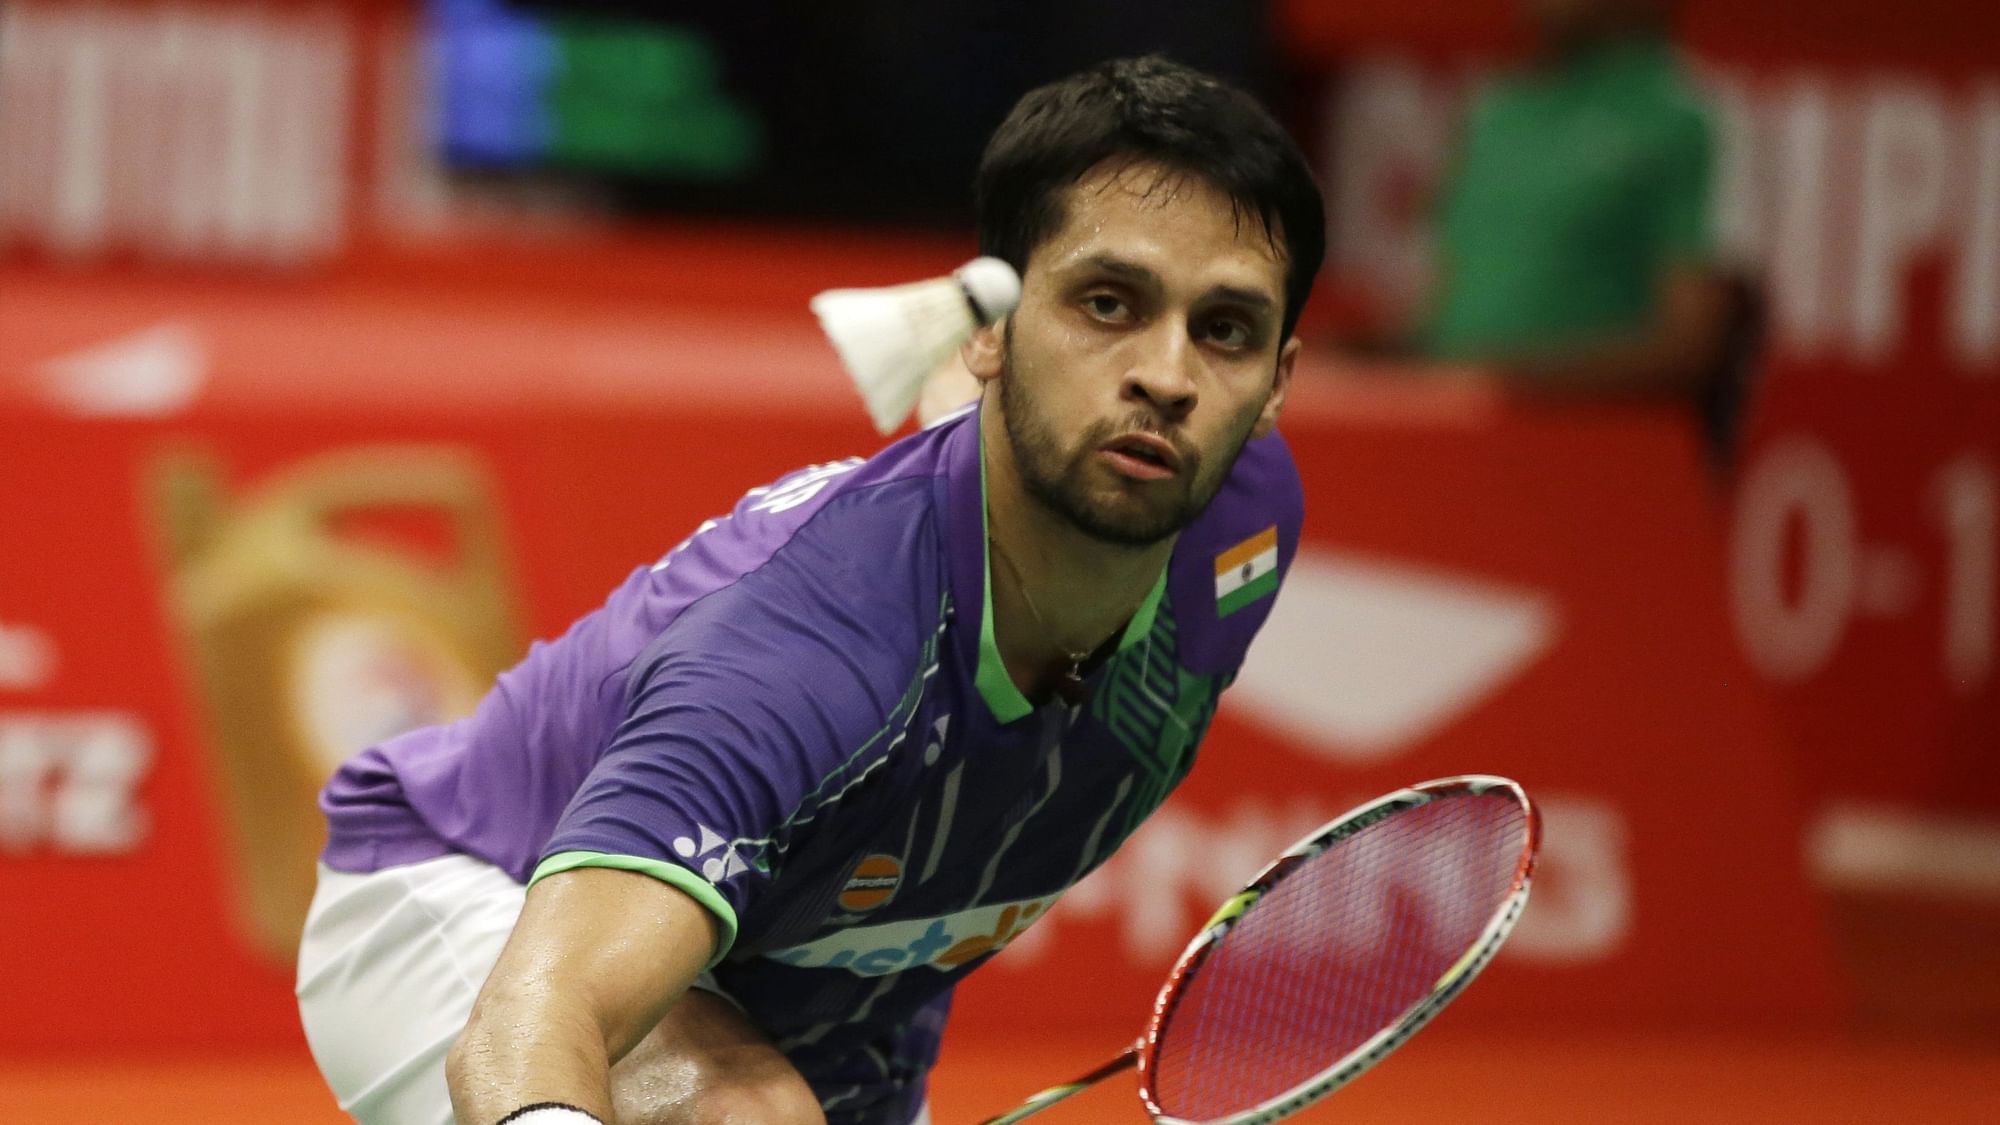 Indian Shuttler P Kashyap Advances Into the Quarters of Taipei Open 2022